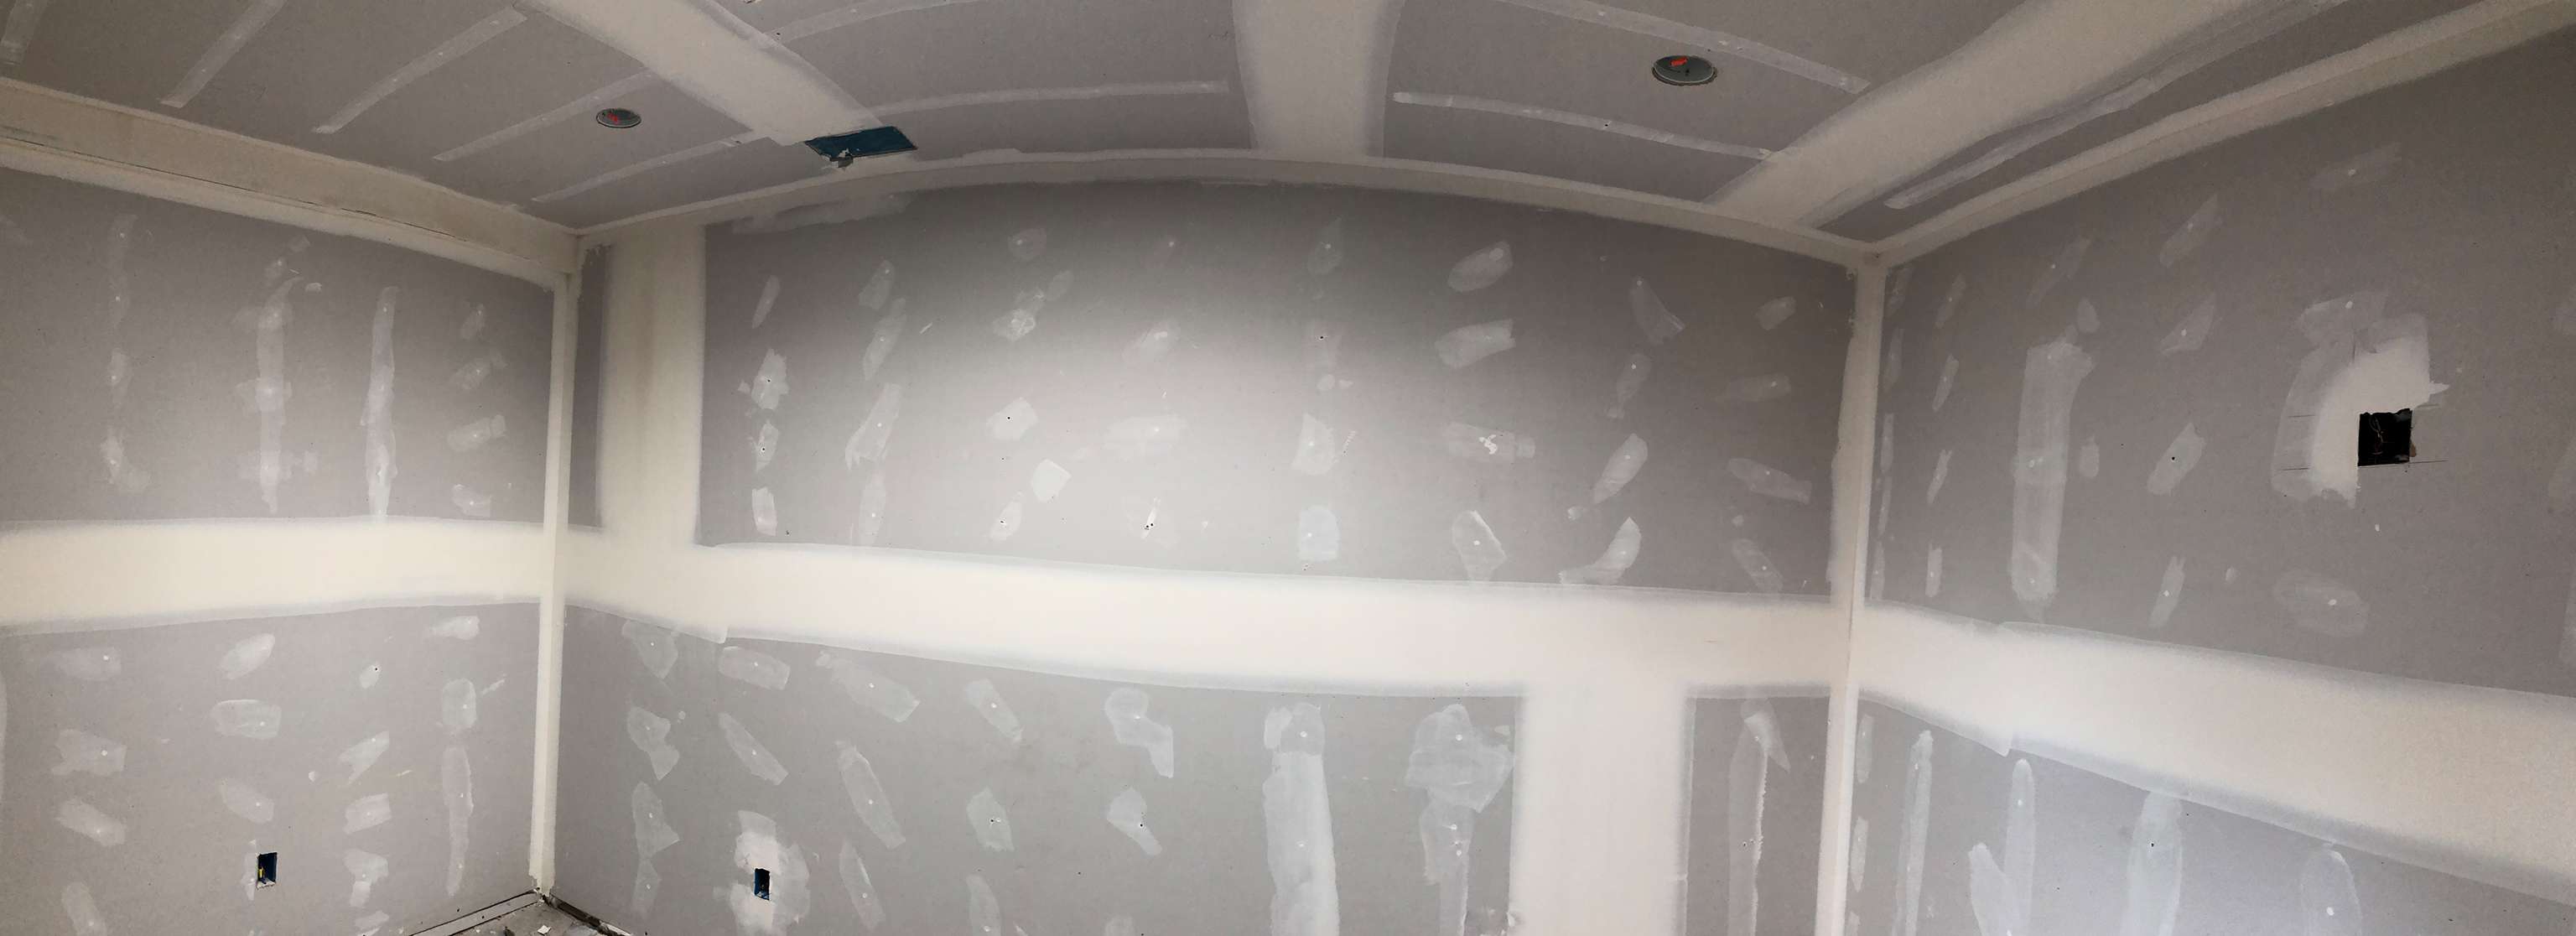 panoramic-view-of-walls-and-ceiling-tape-with-drywall-mud